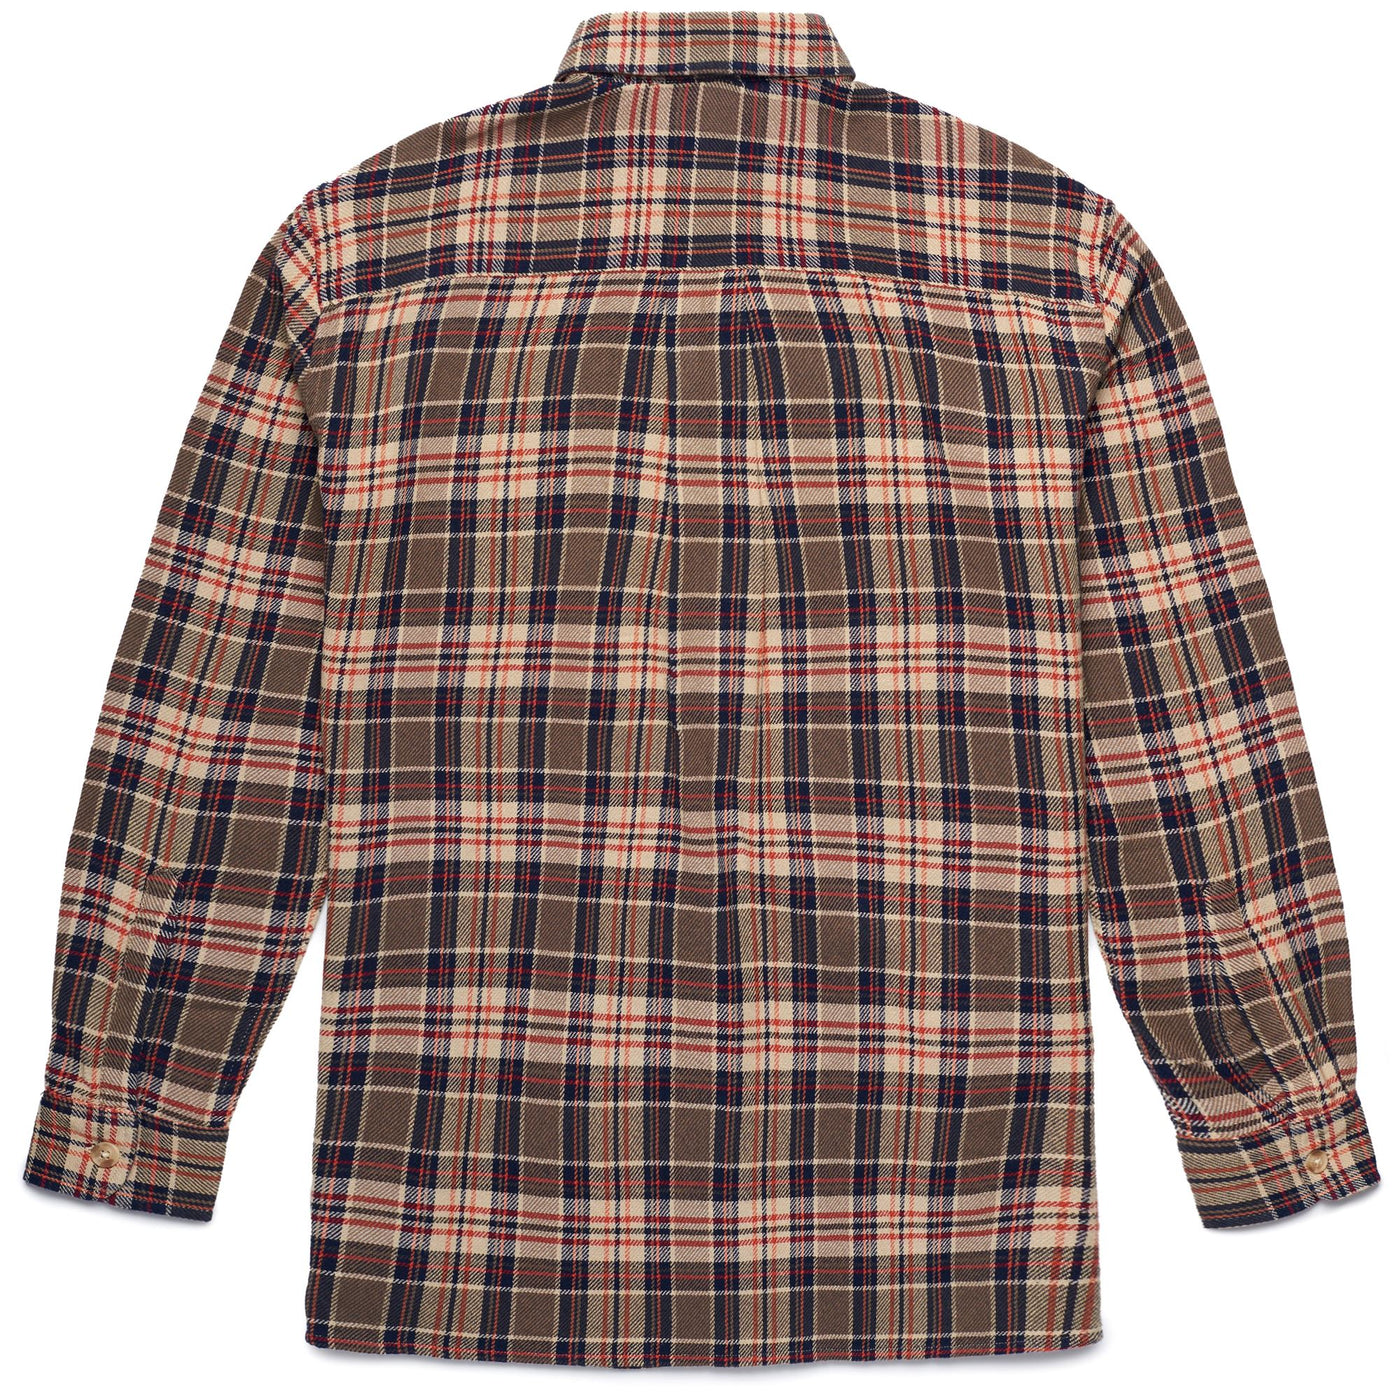 OVERSHIRT Woman ARSAEL OVERSHIRTS BROWN PLOMB-BEIGE GREY-BLUE NAVY CHECKED Dressed Front (jpg Rgb)	